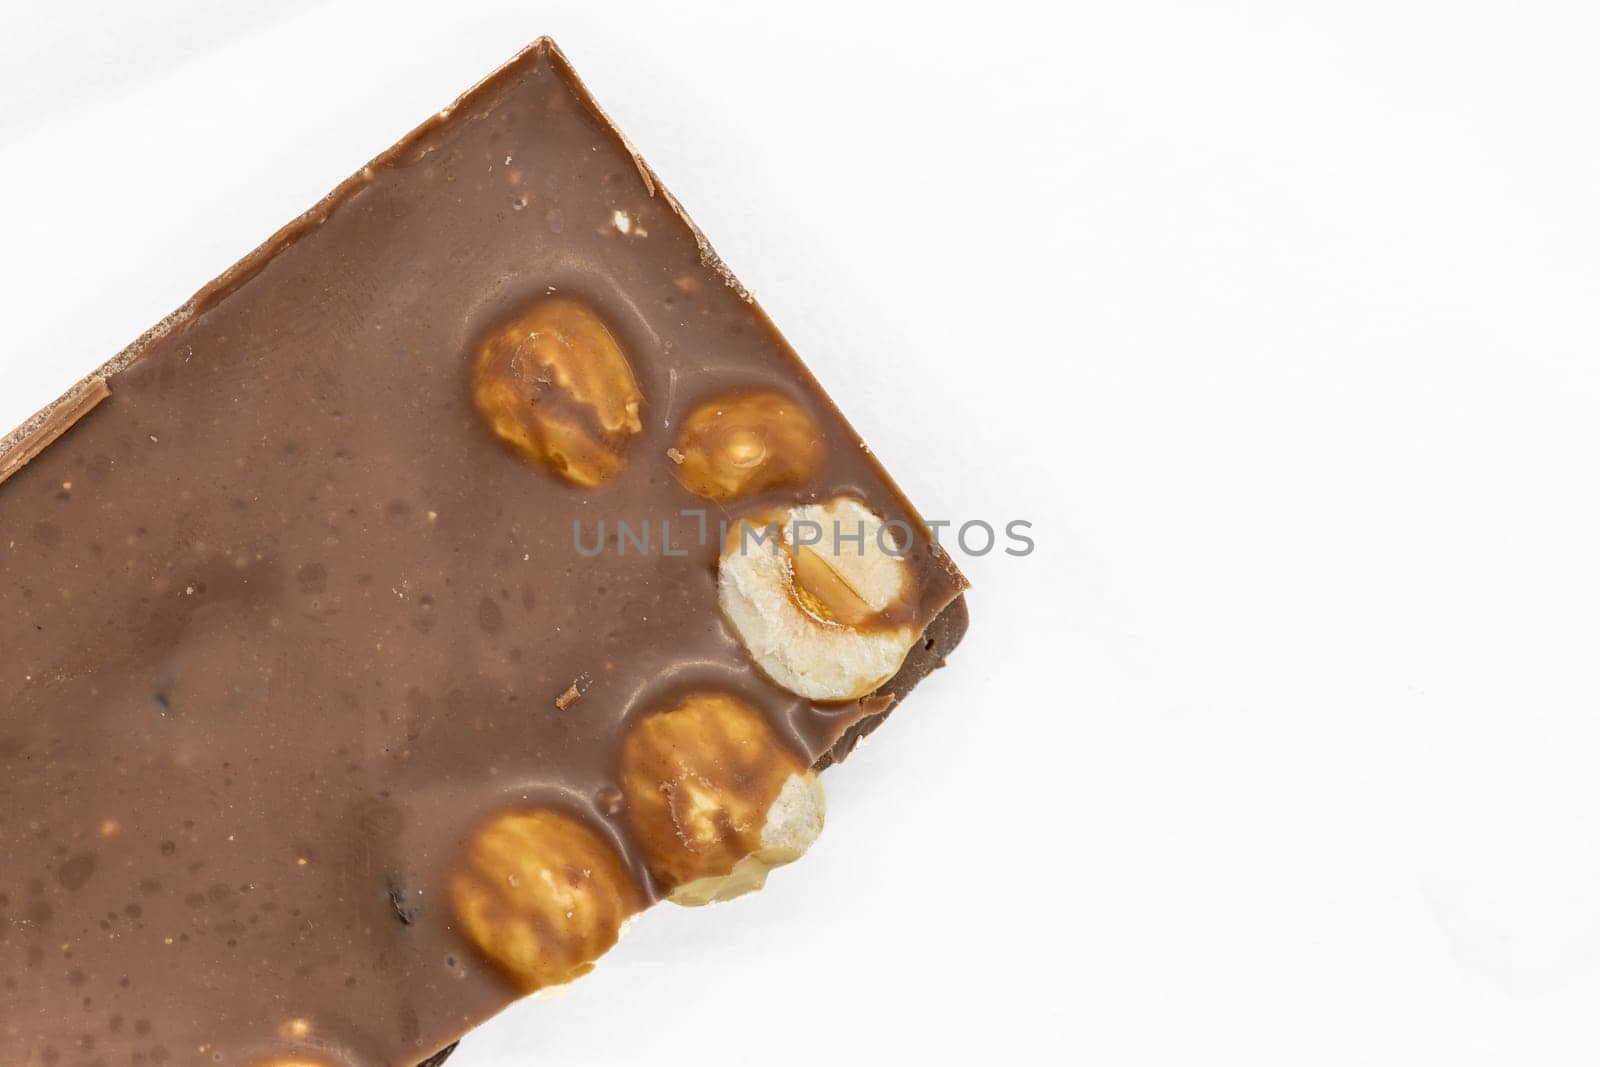 Milk Chocolate Bar with Hazelnuts on White Background by exndiver